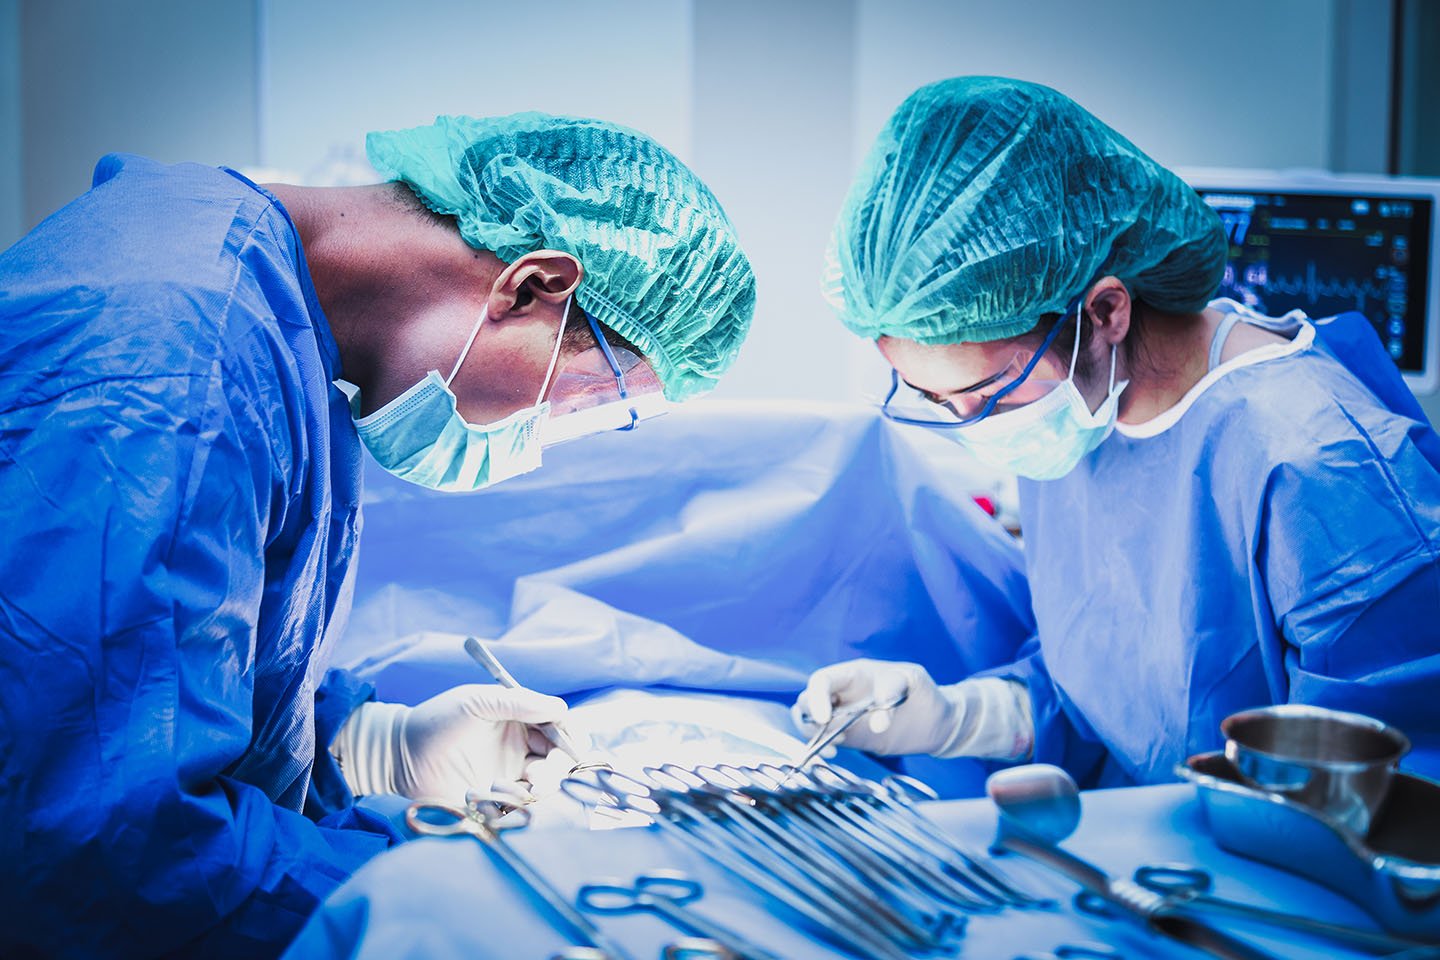 Surgery technologists play a crucial role in the OR.